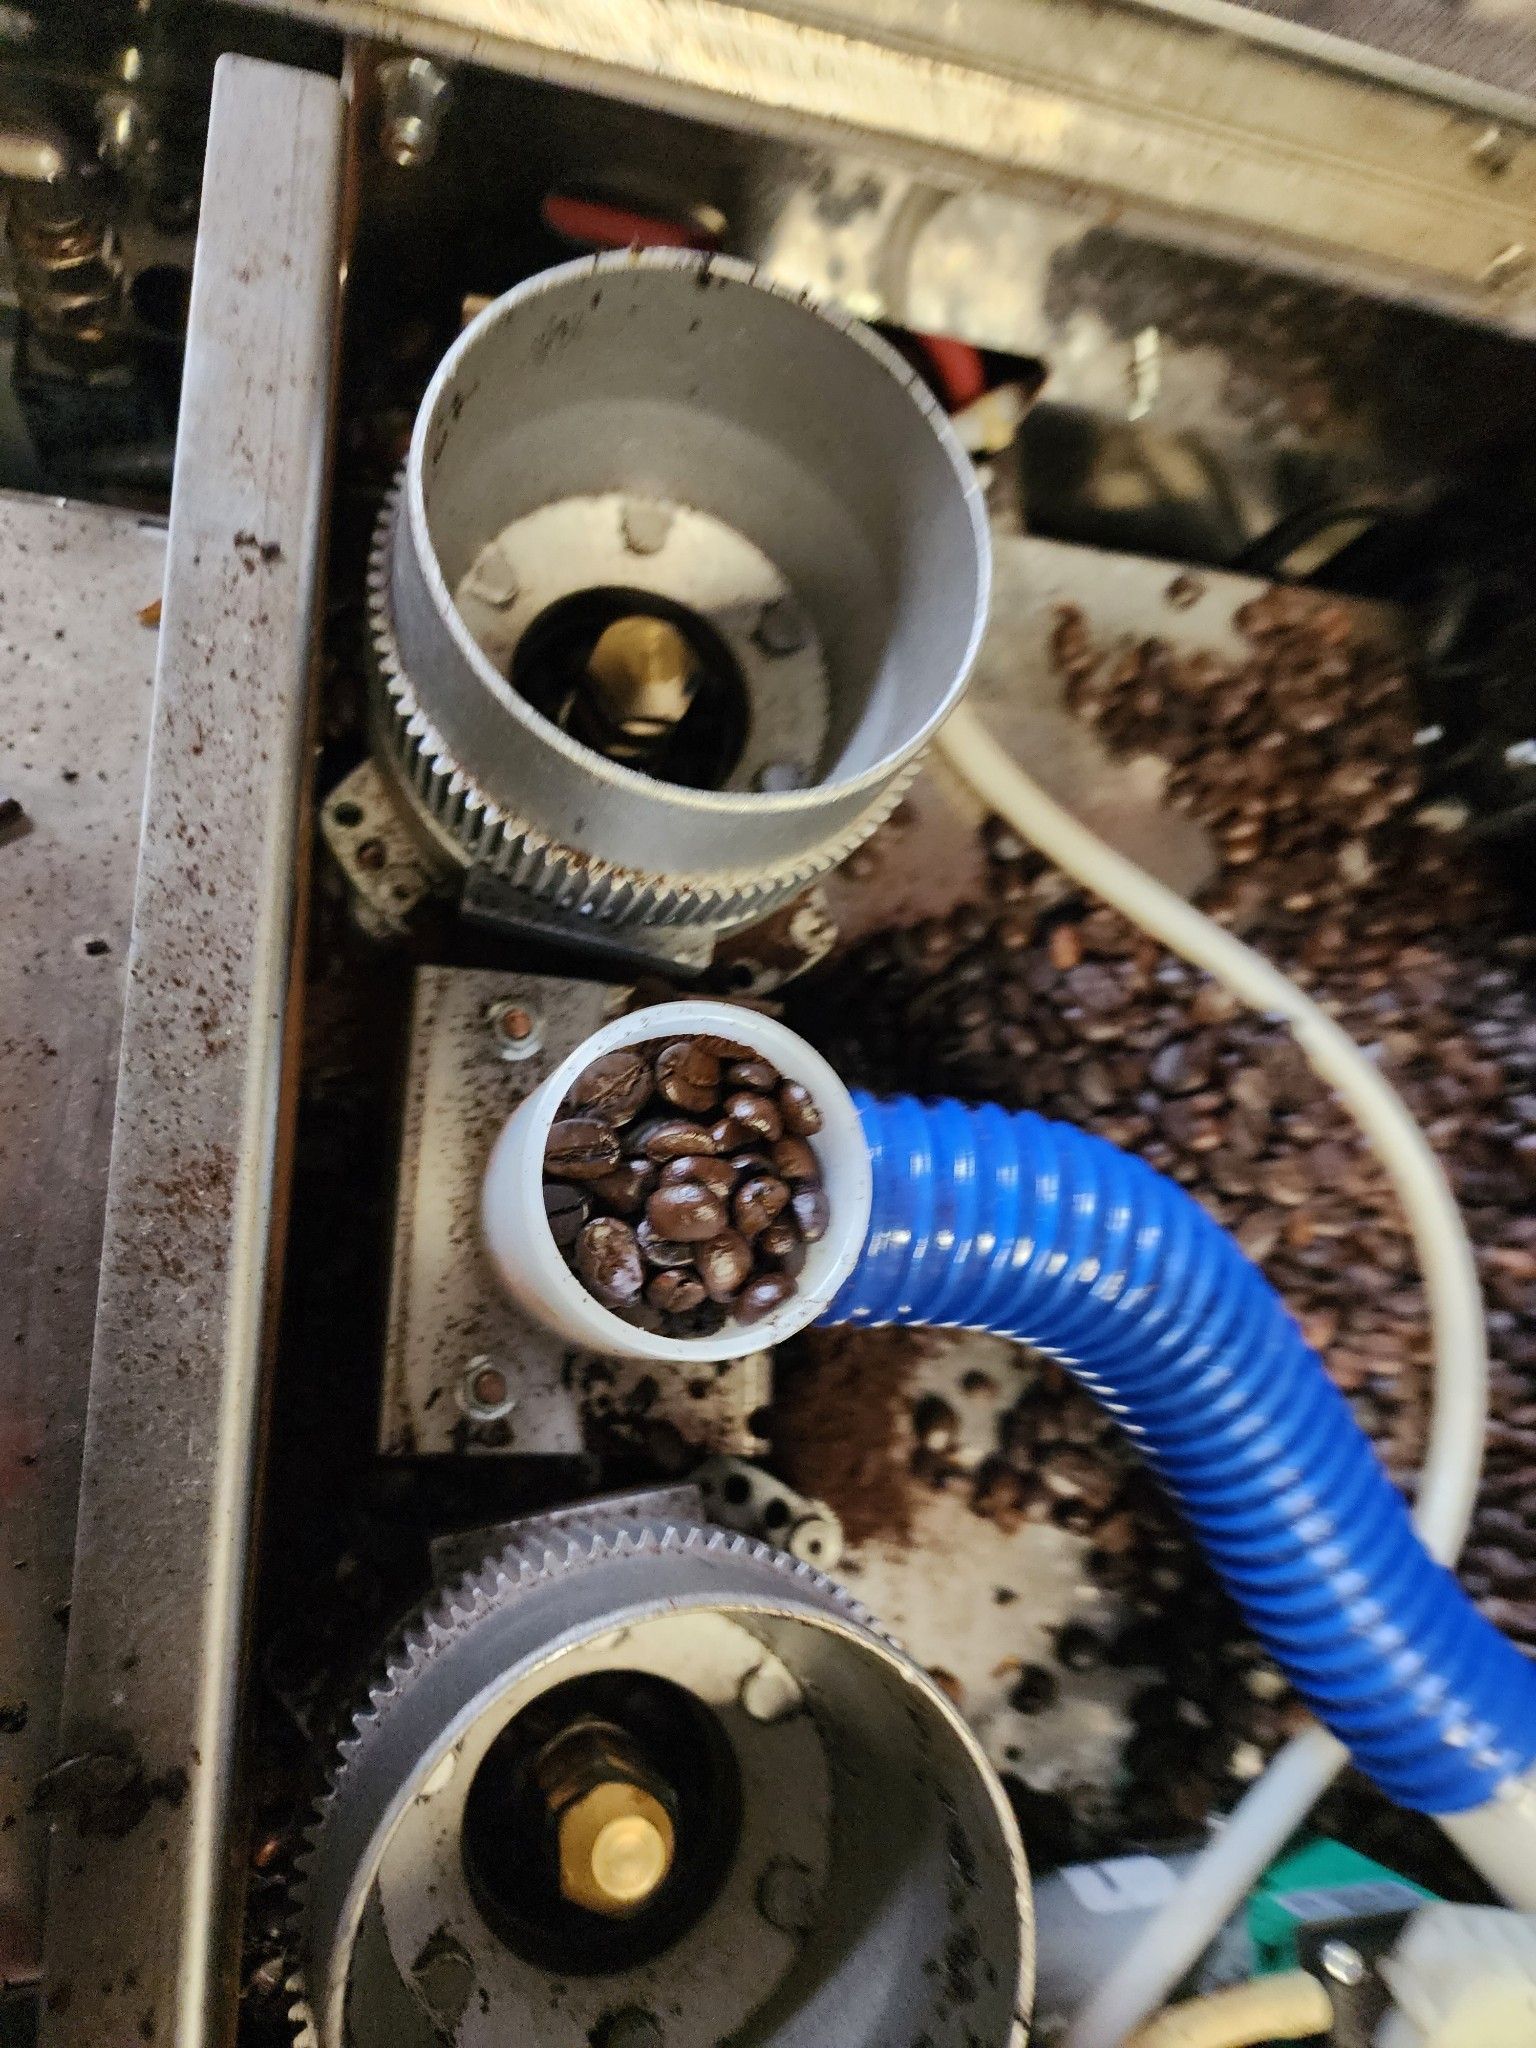 A blue hose is connected to a machine that is filled with coffee beans.